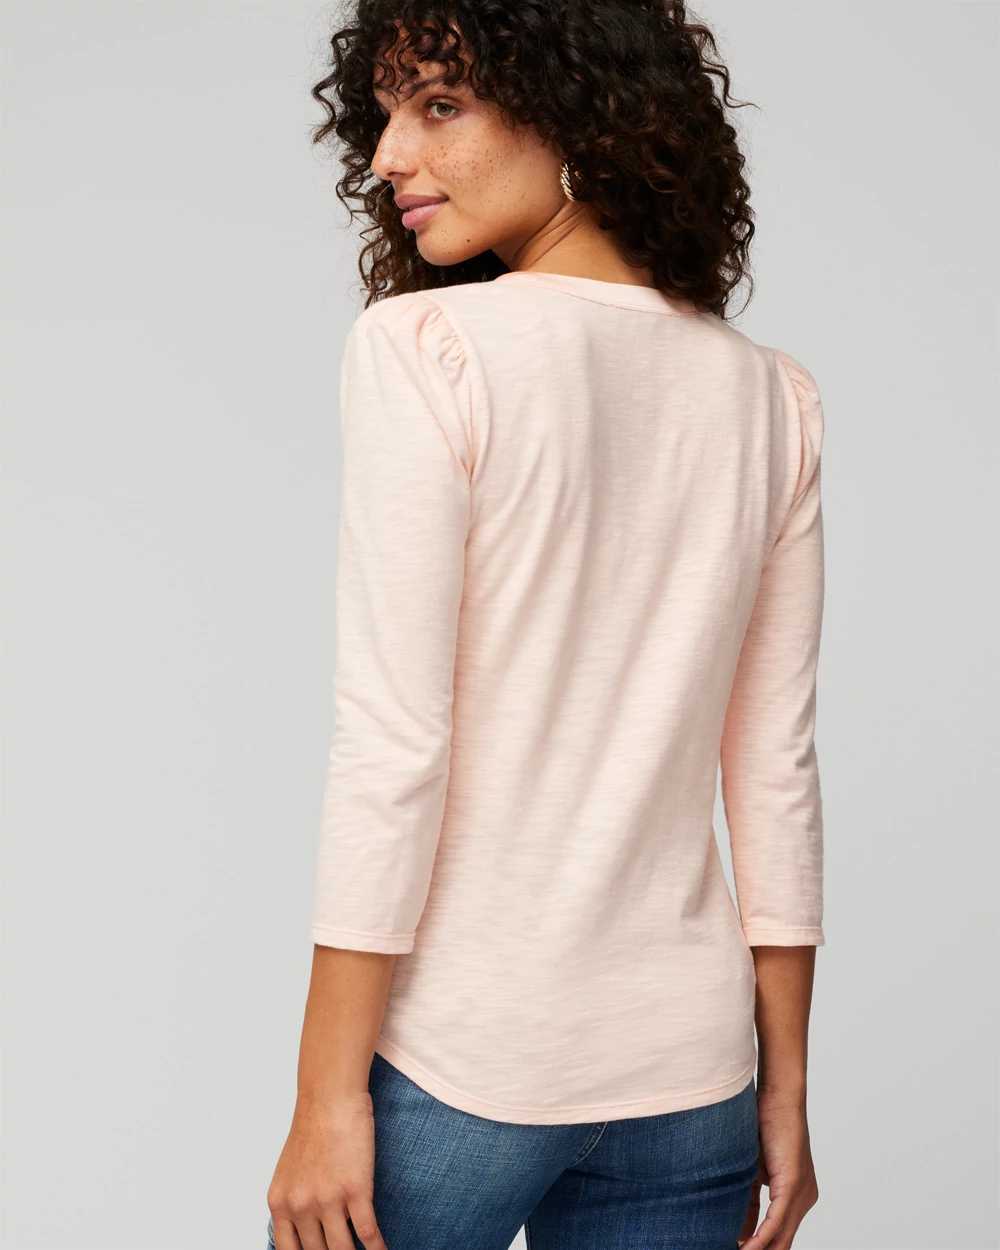 3/4 Sleeve Henley Tee click to view larger image.